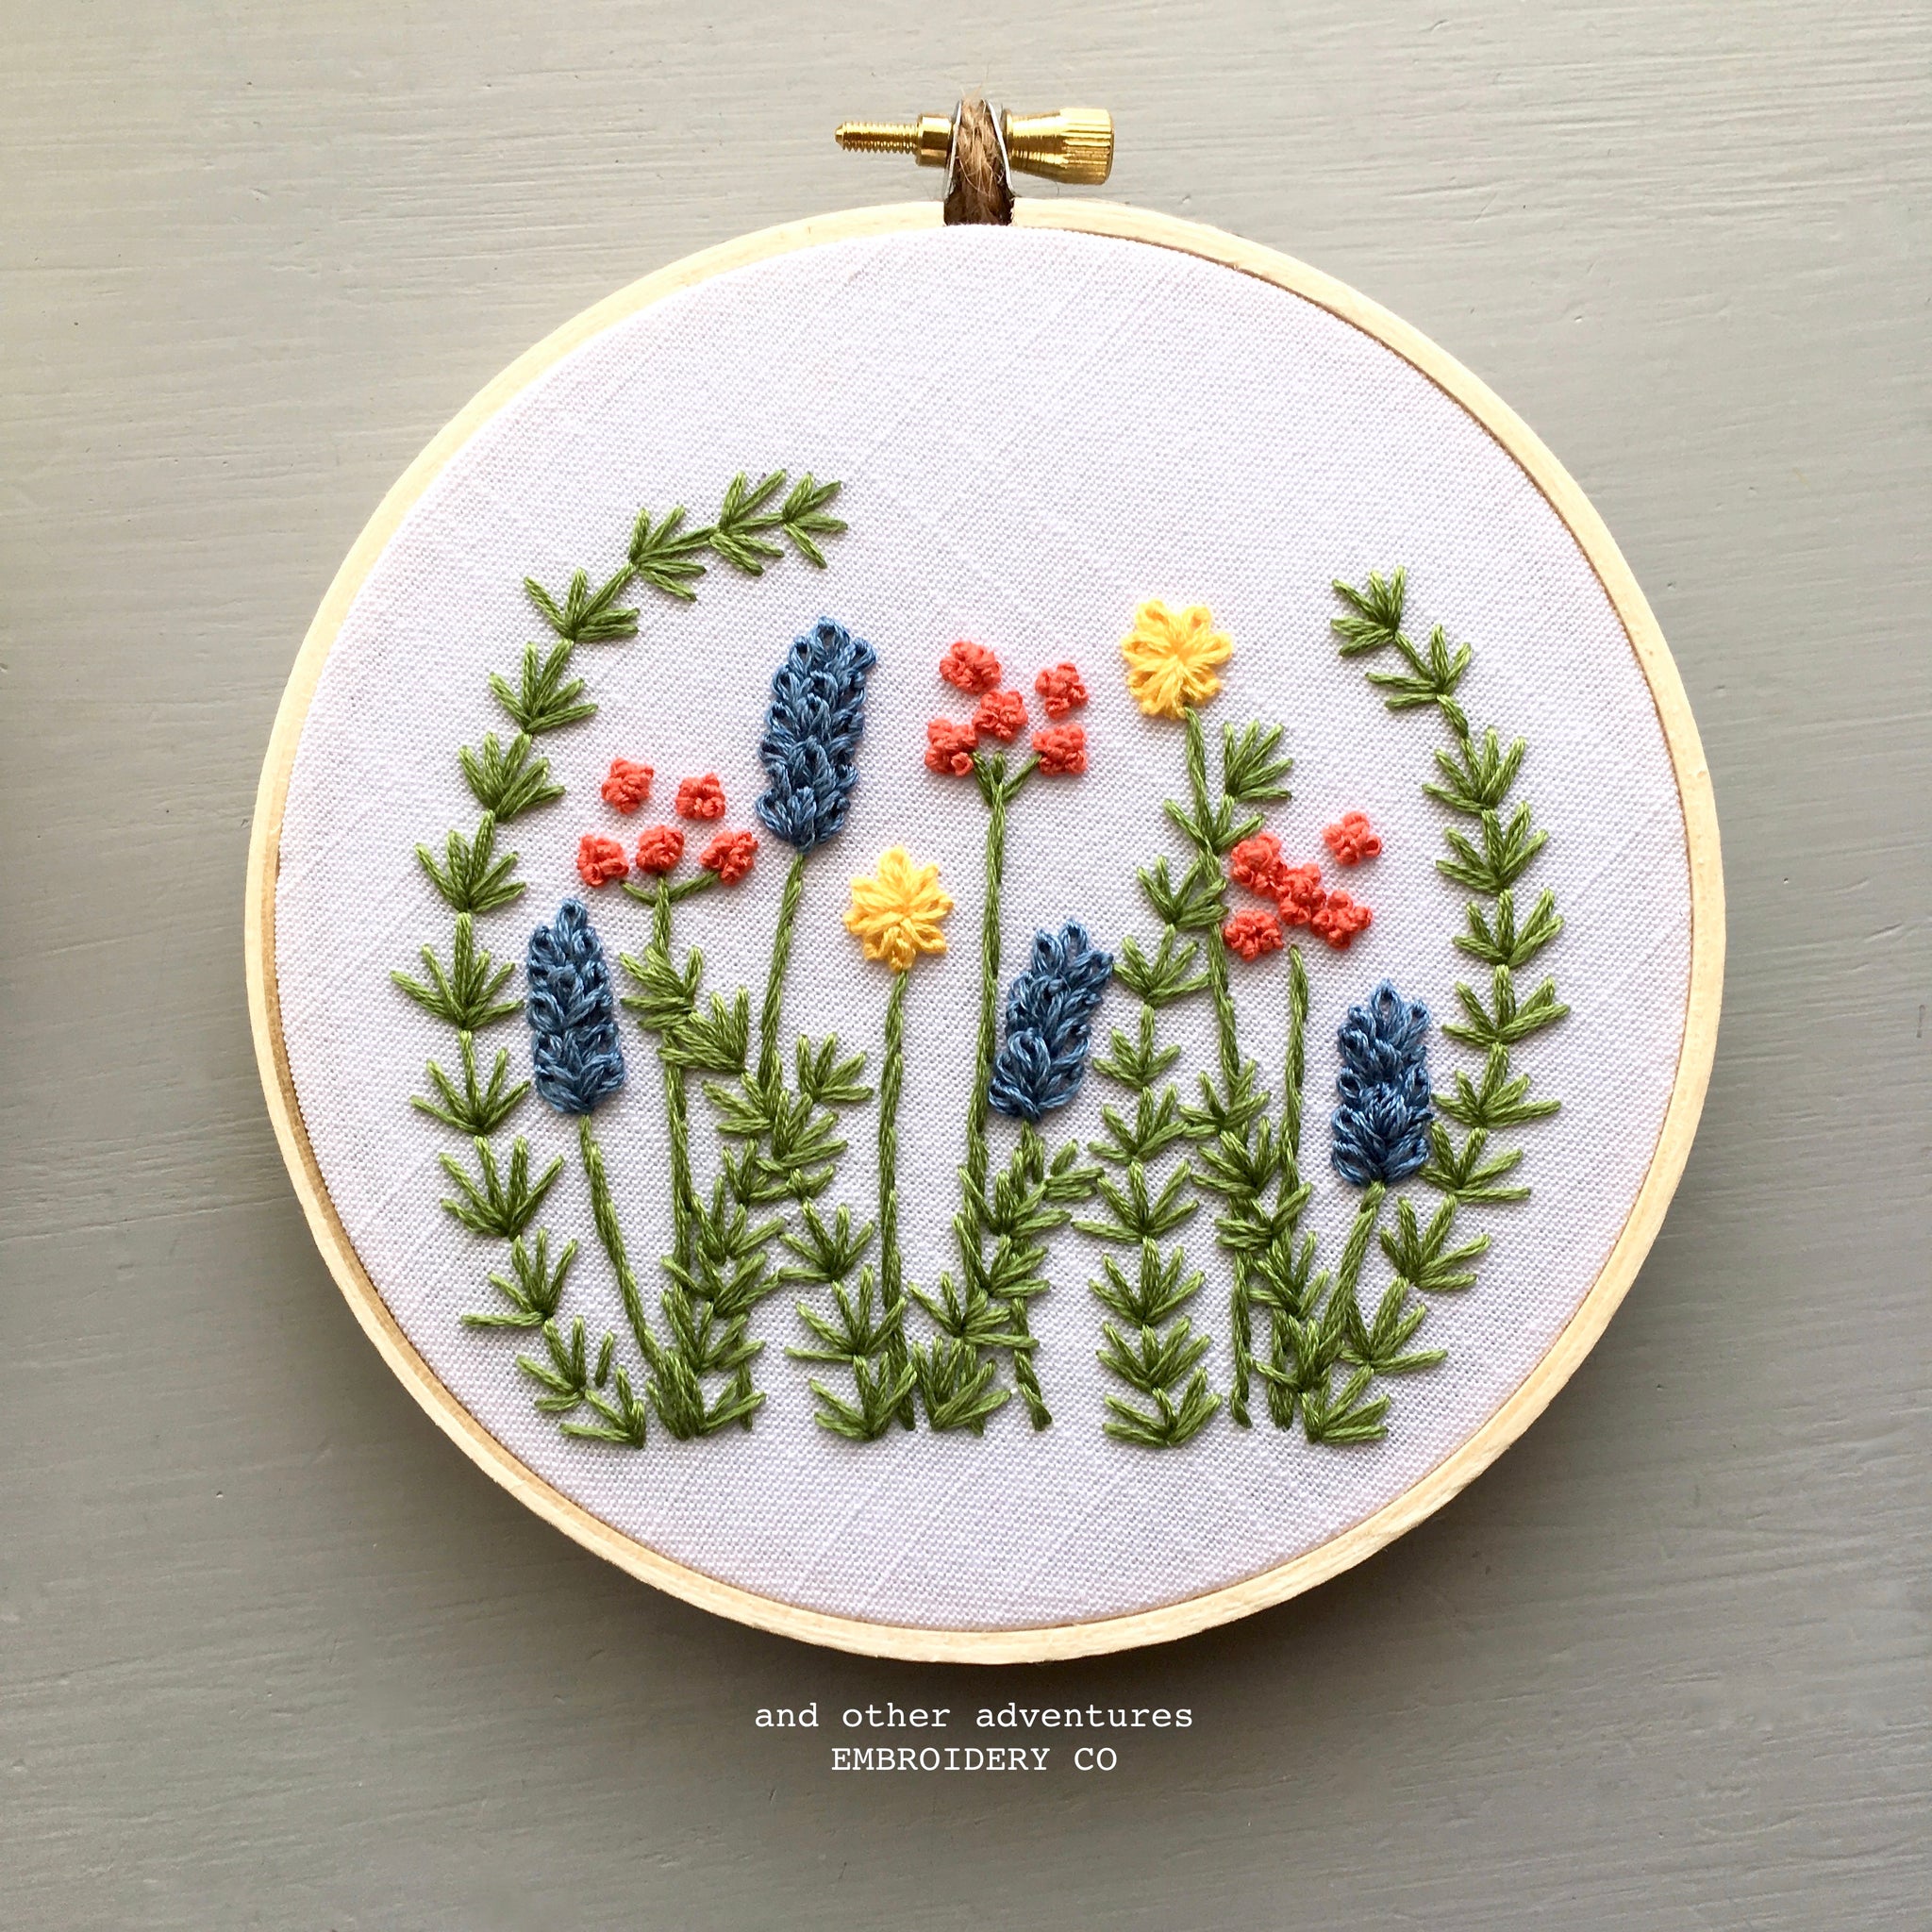 Embroidery Beginner Guide